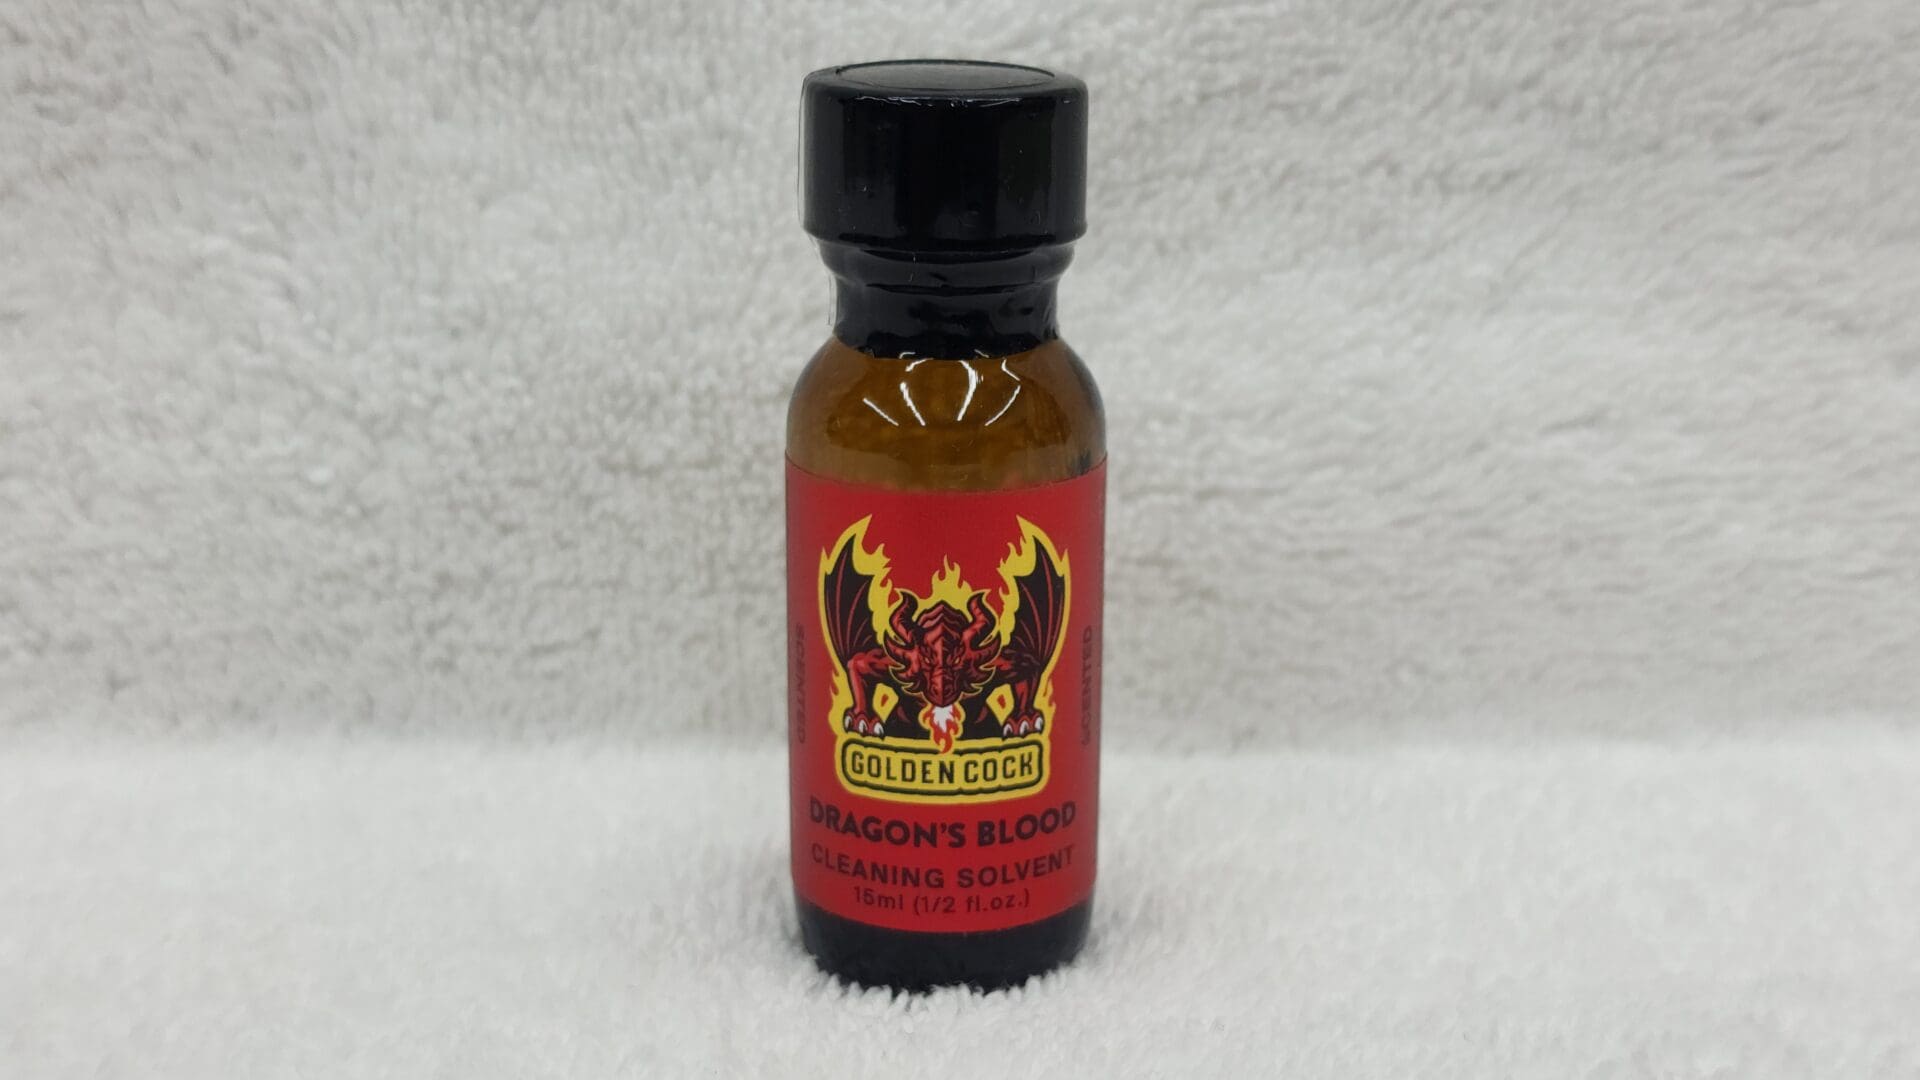 A small bottle labeled "Golden Cock Dragon's Blood" cleaning solvent on a white towel background.